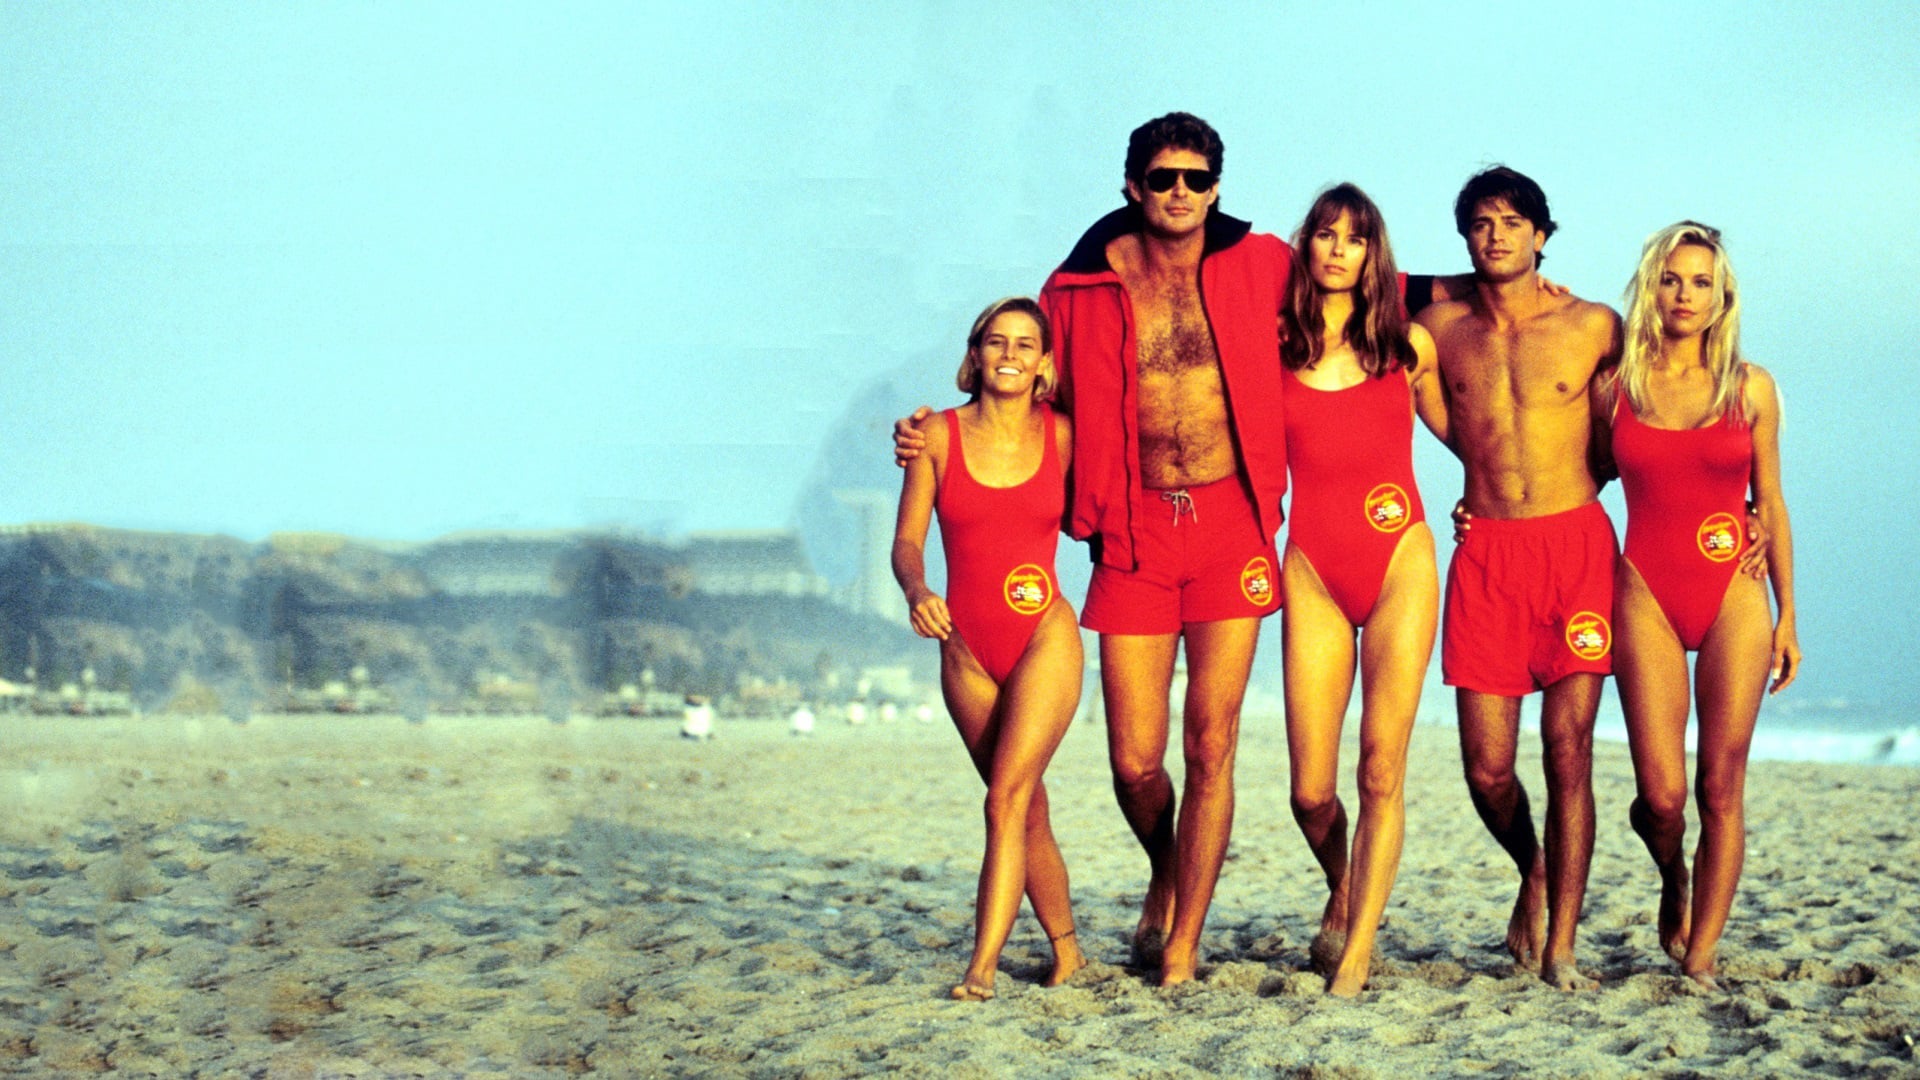 baywatch theme song (intro) free mp3 download